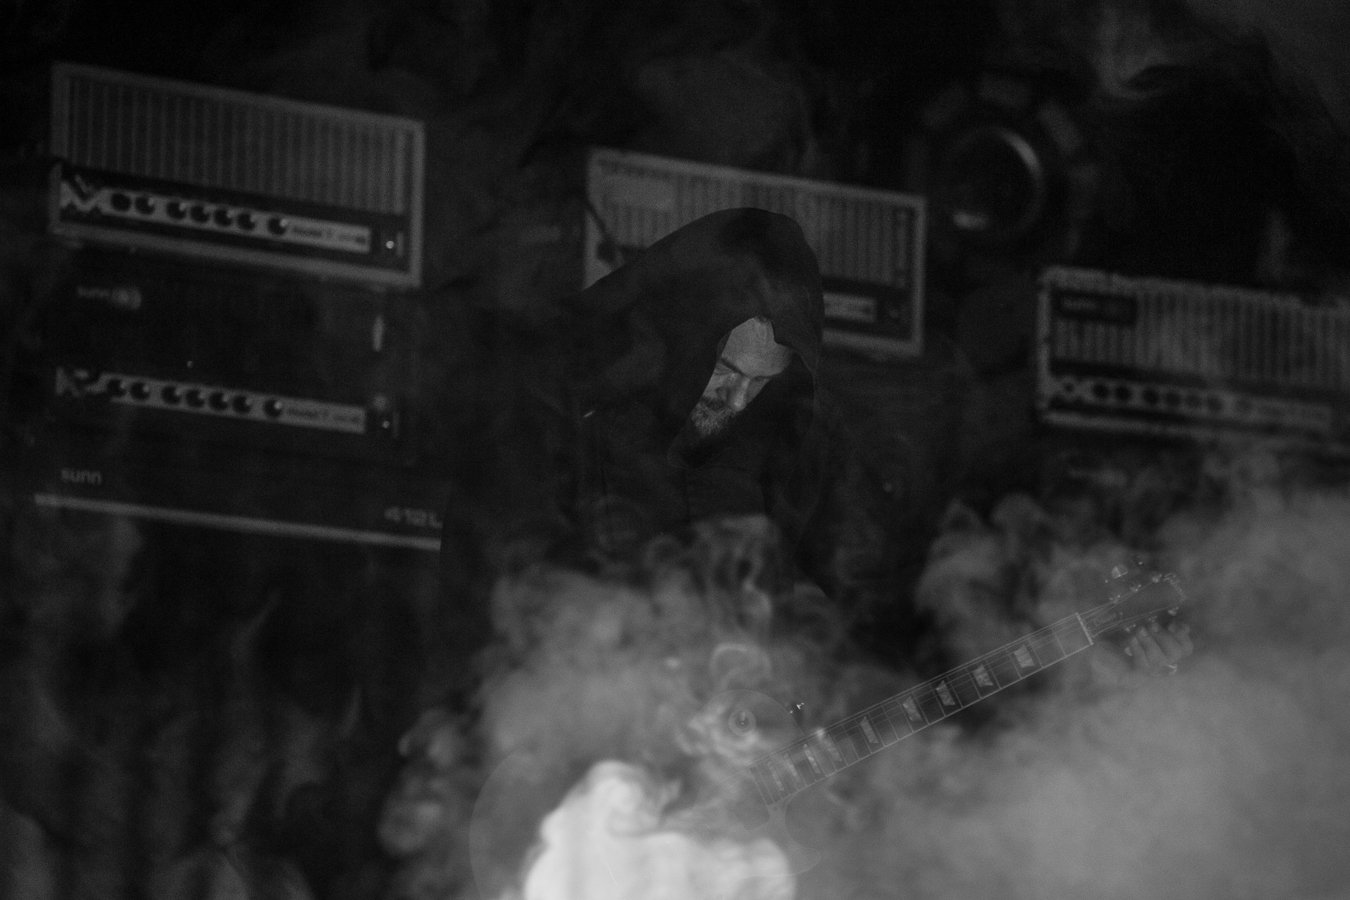 Show Review: The Sunn O))) Show on Nov. 25 Engulfed the Bay Area in a Wall of Sound